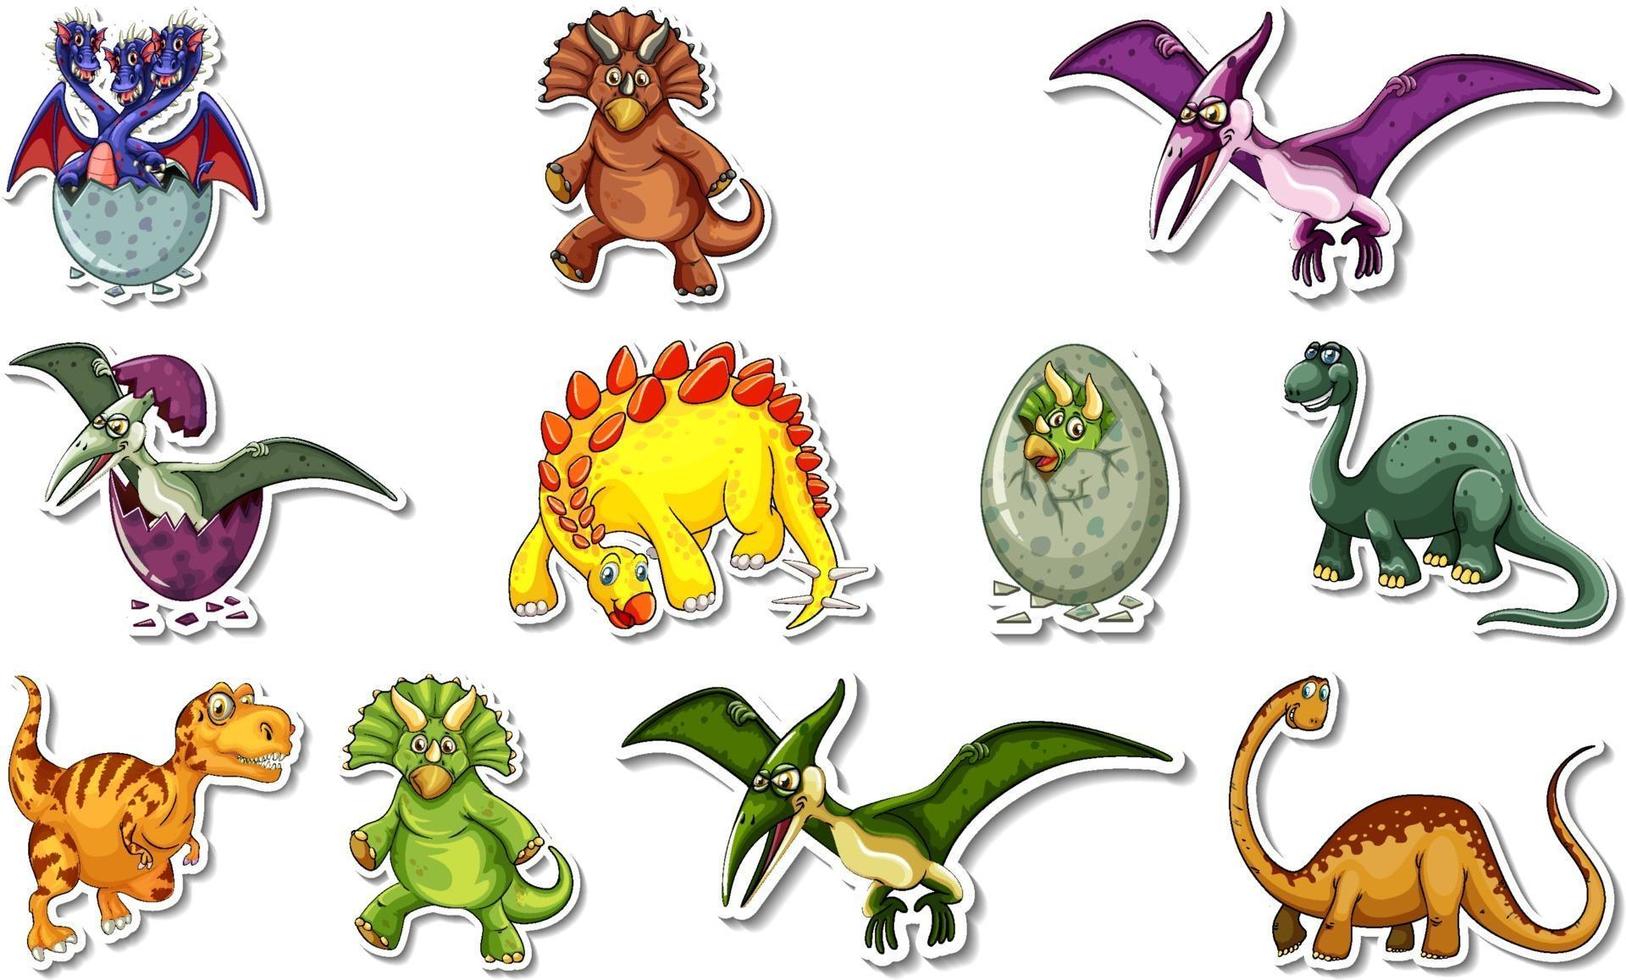 Sticker set with different types of dinosaurs cartoon characters vector